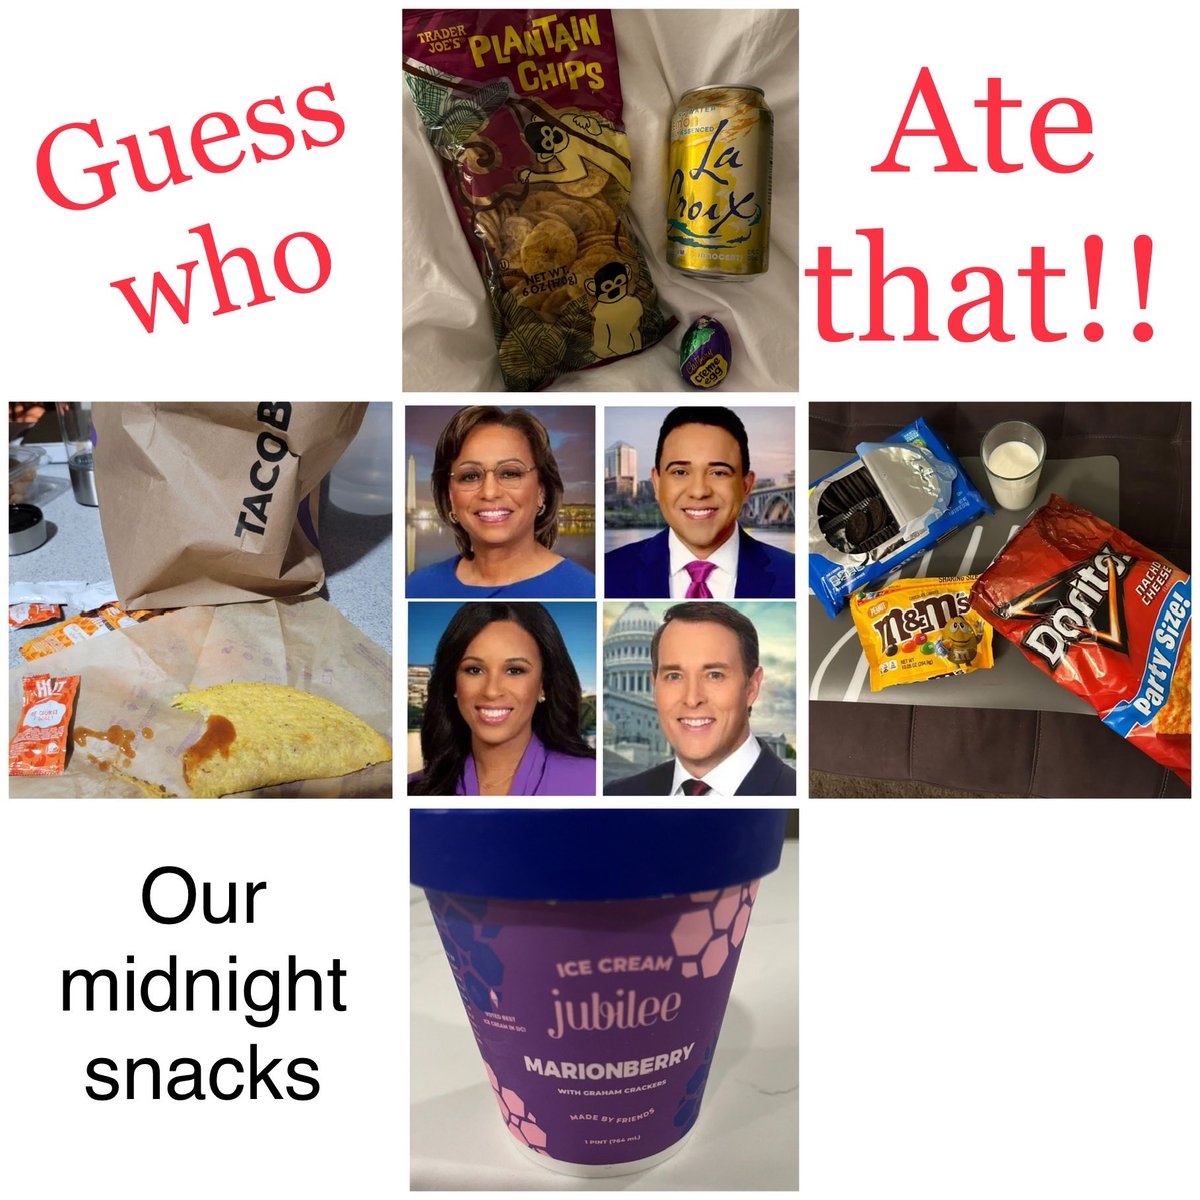 Who ate what?? After the late news we are guilty of some bizarre midnight snacking at home. Of the four of us, can you match us with our food? ⁦@Michelle7News⁩ ⁦@VJohnson7News⁩ ⁦@JohnRogers7News⁩